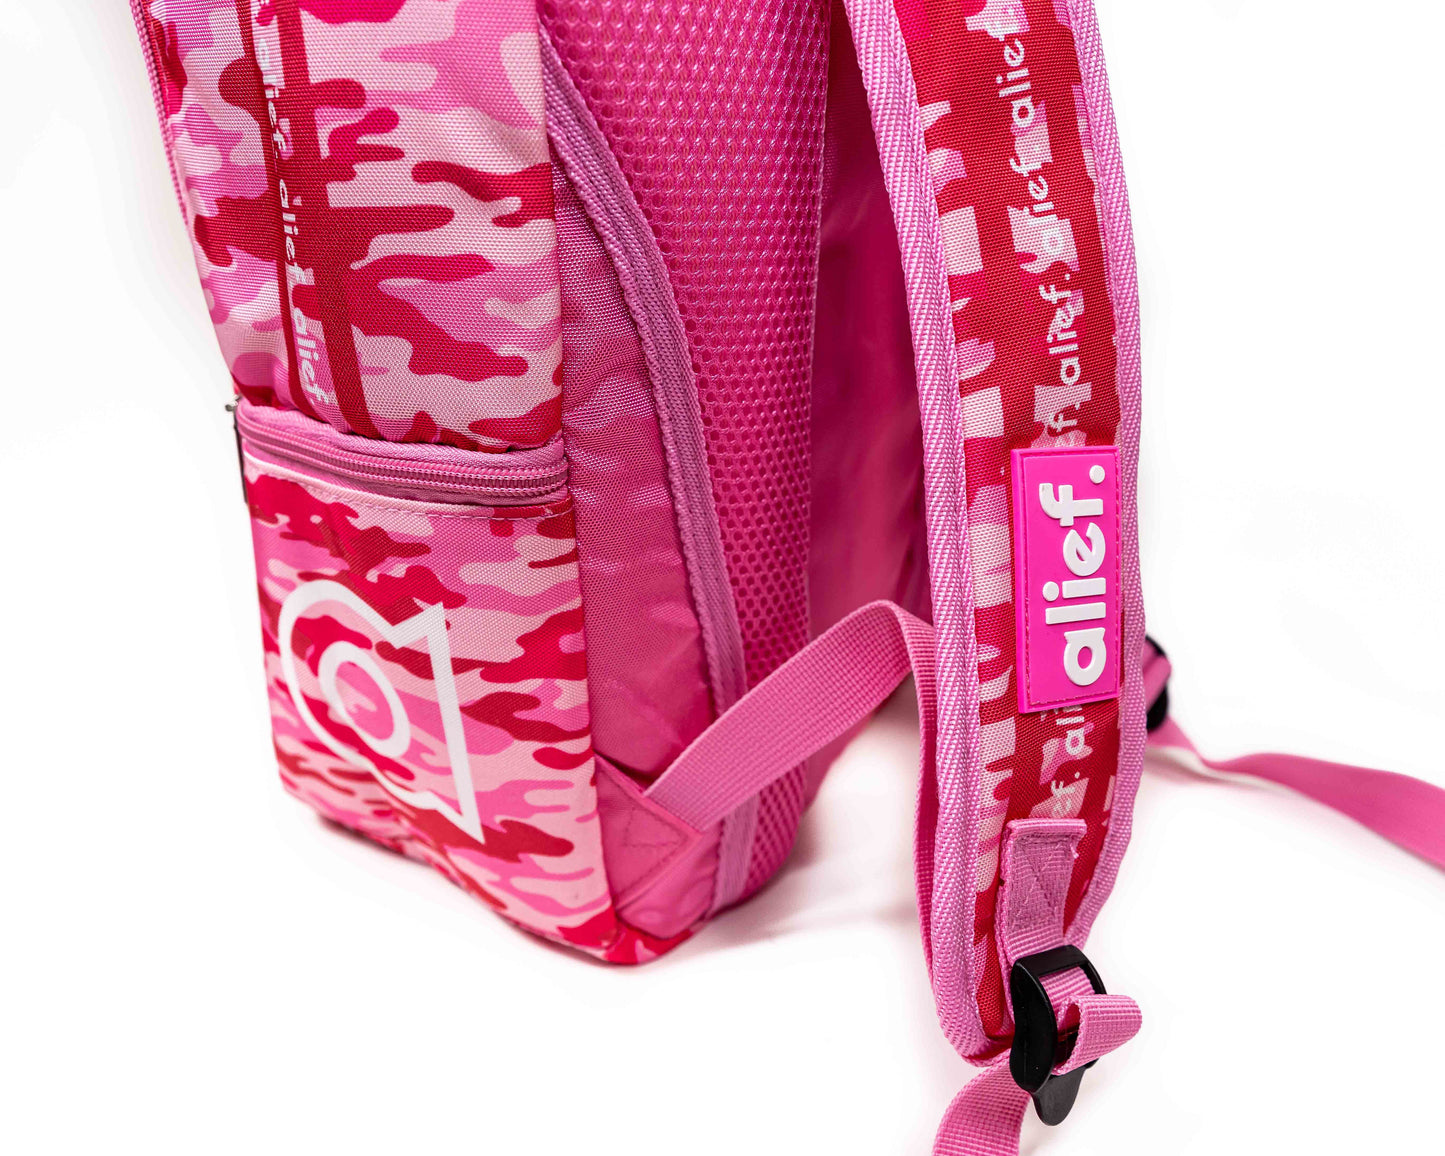 Alief Camouflage Backpack - PINK